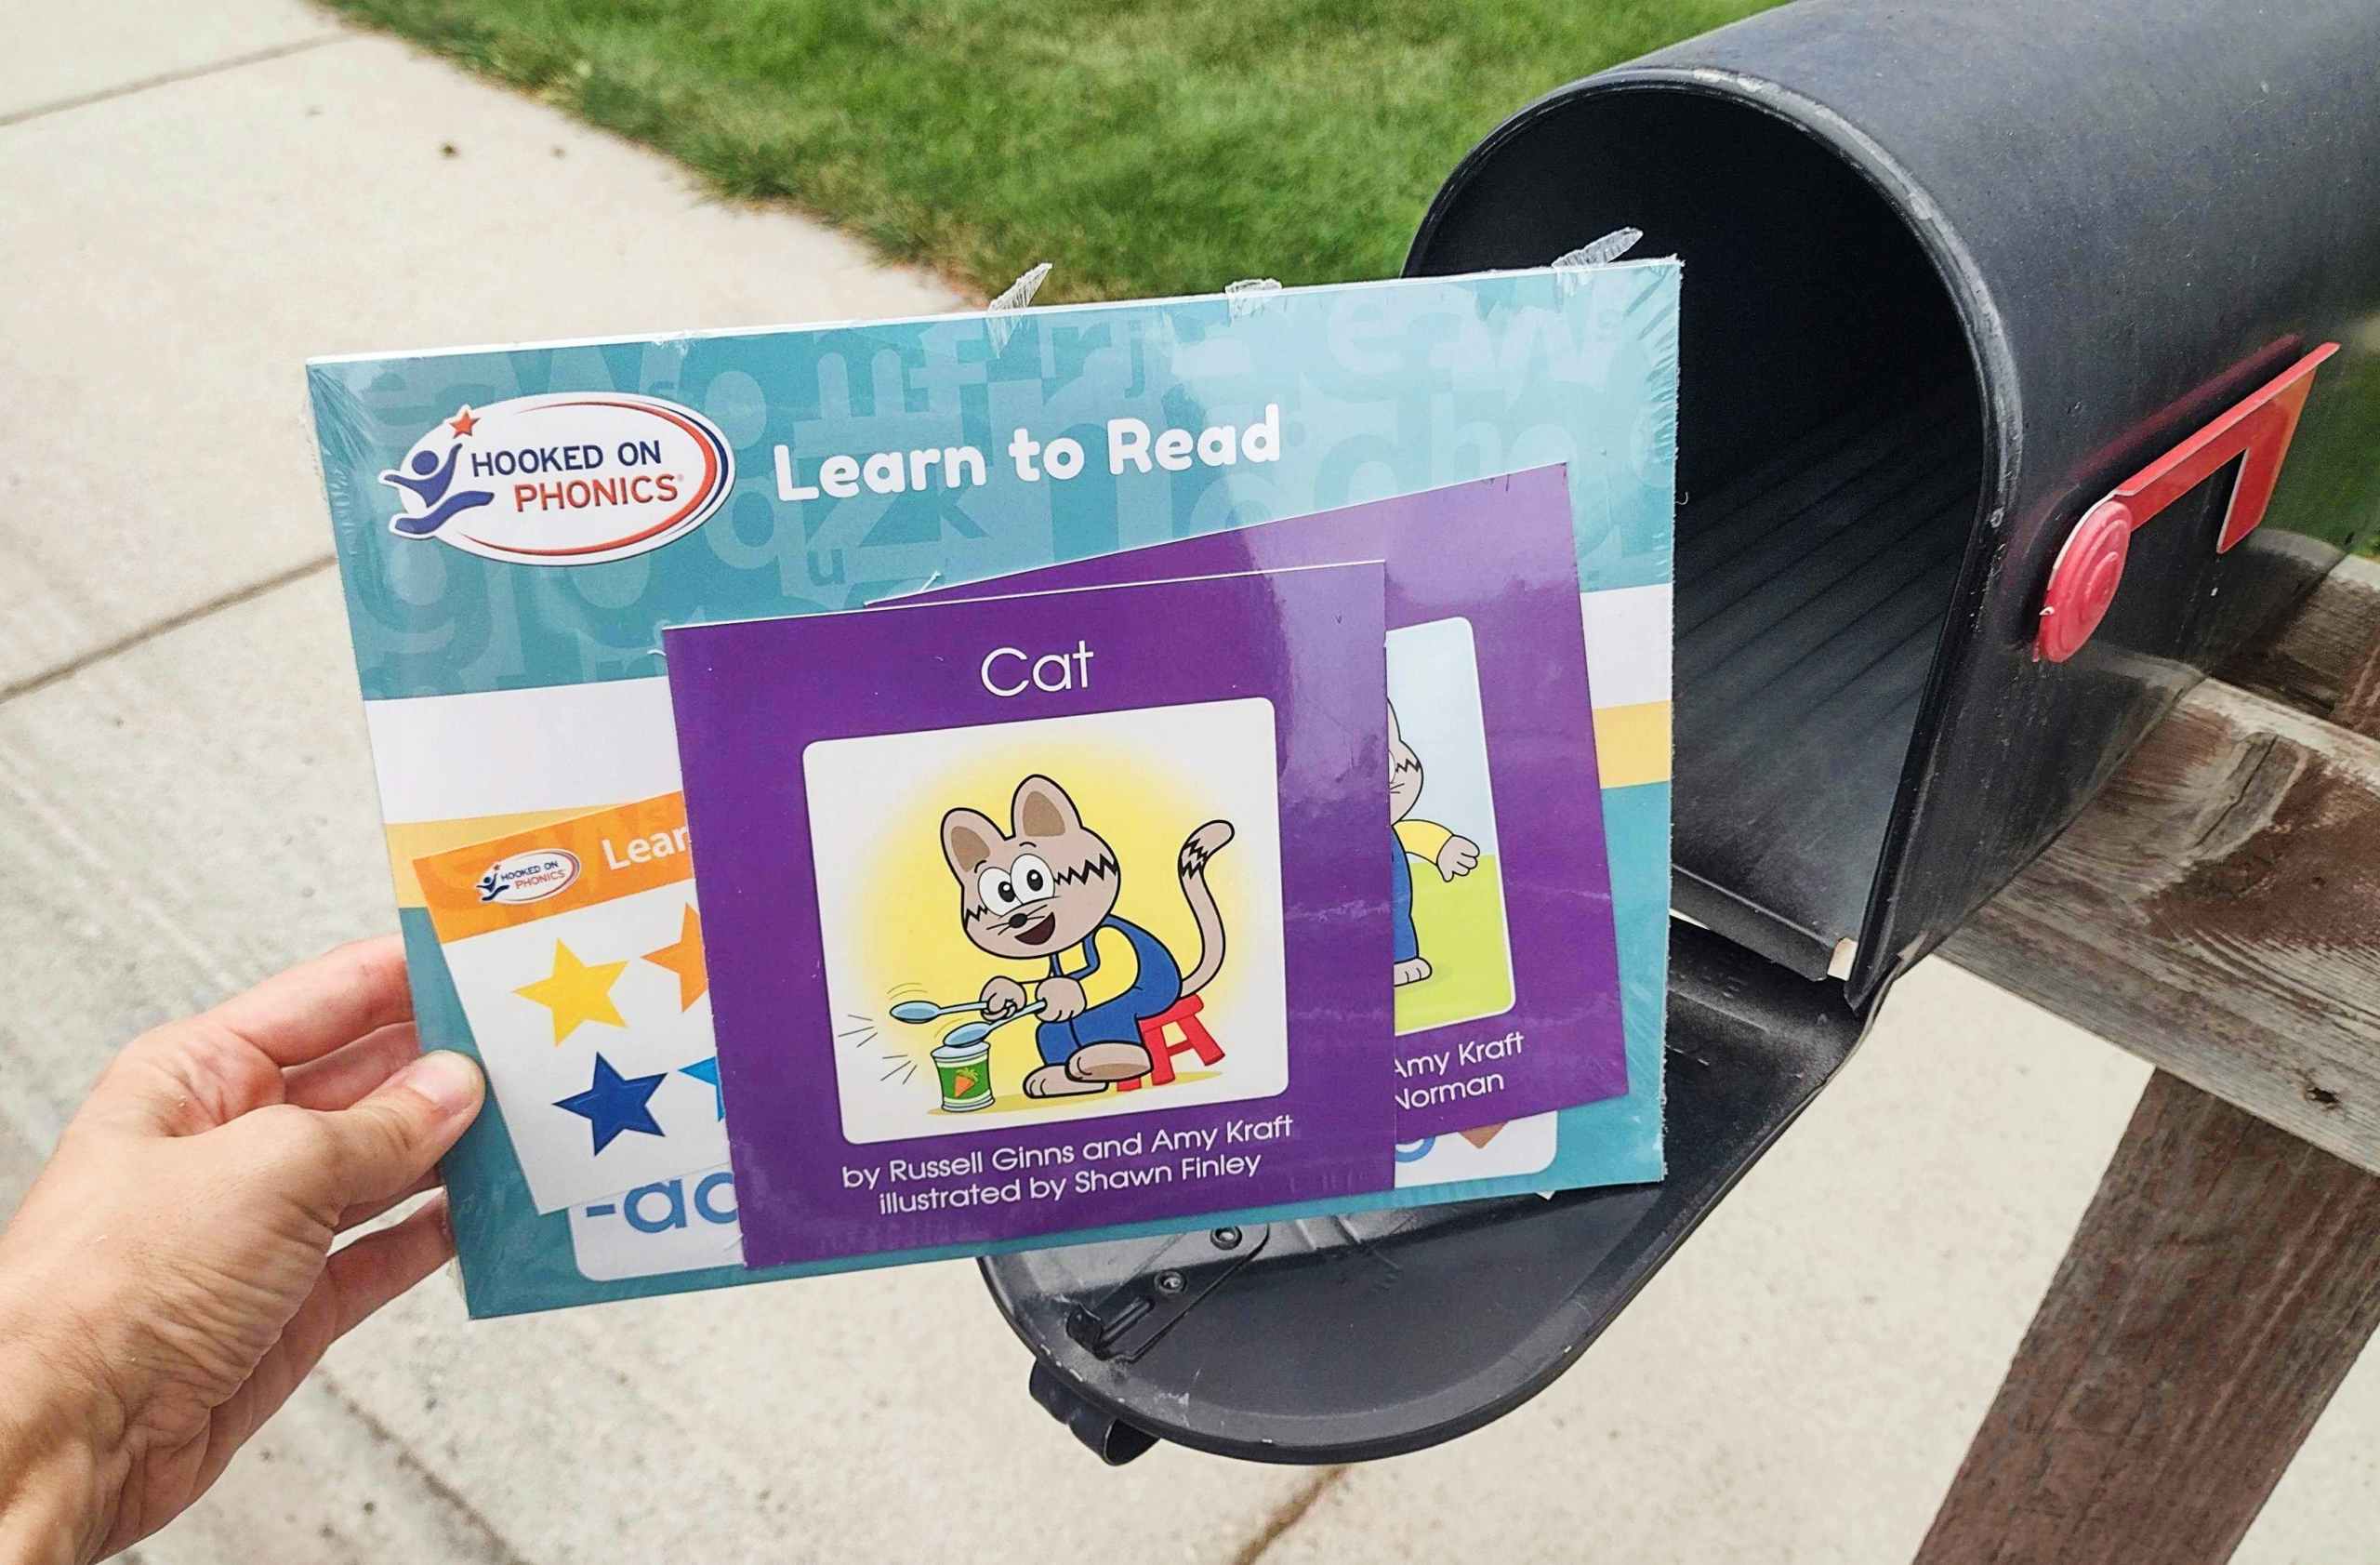 hooked on phonics materials held next to a mailbox